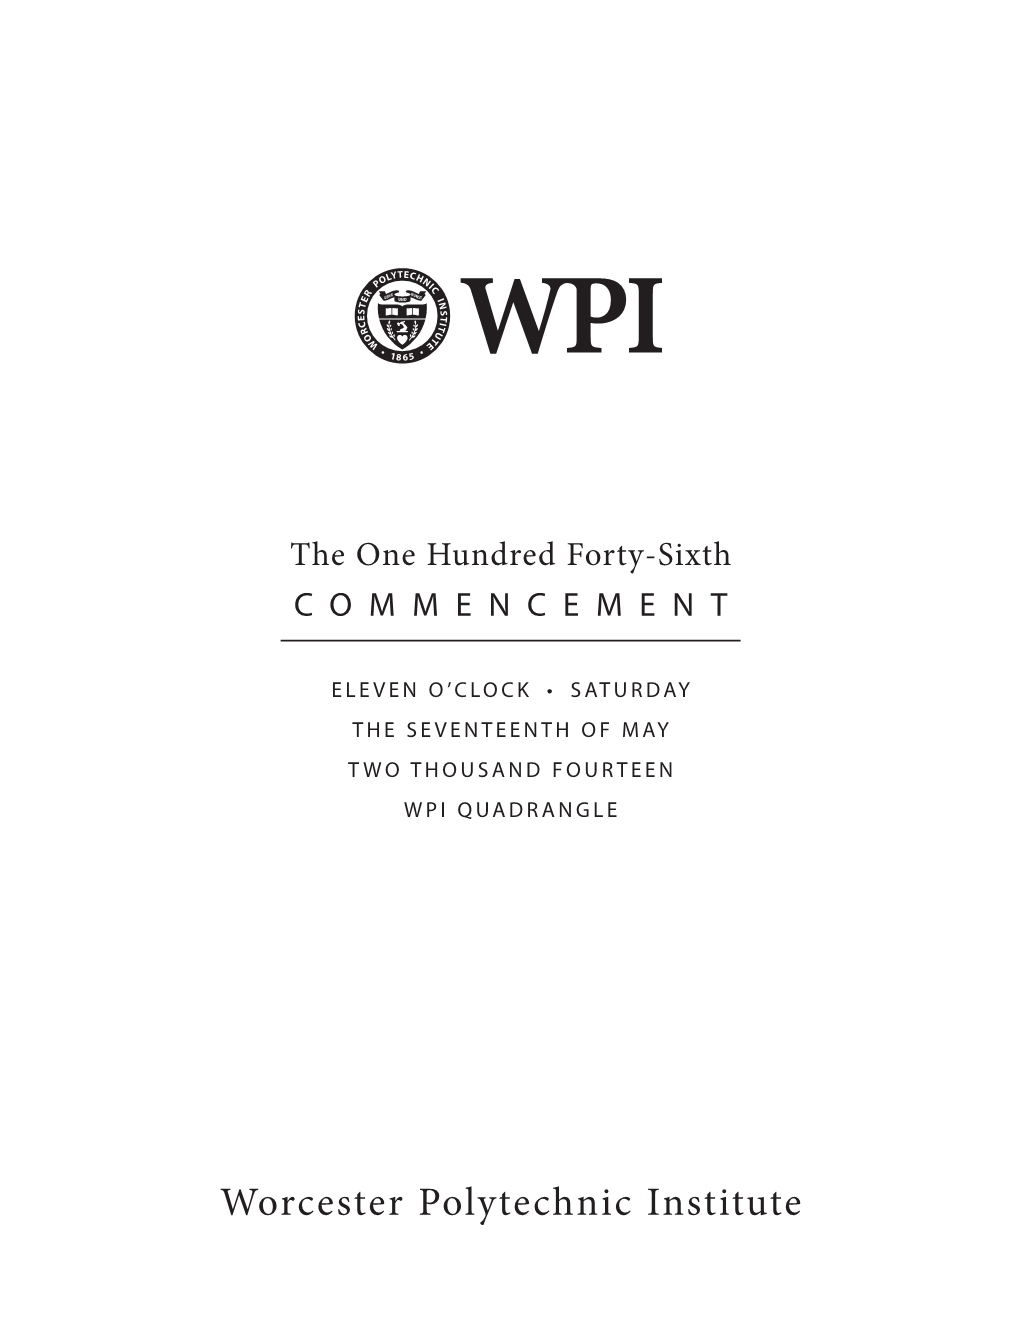 The One Hundred Forty-Sixth COMMENCEMENT